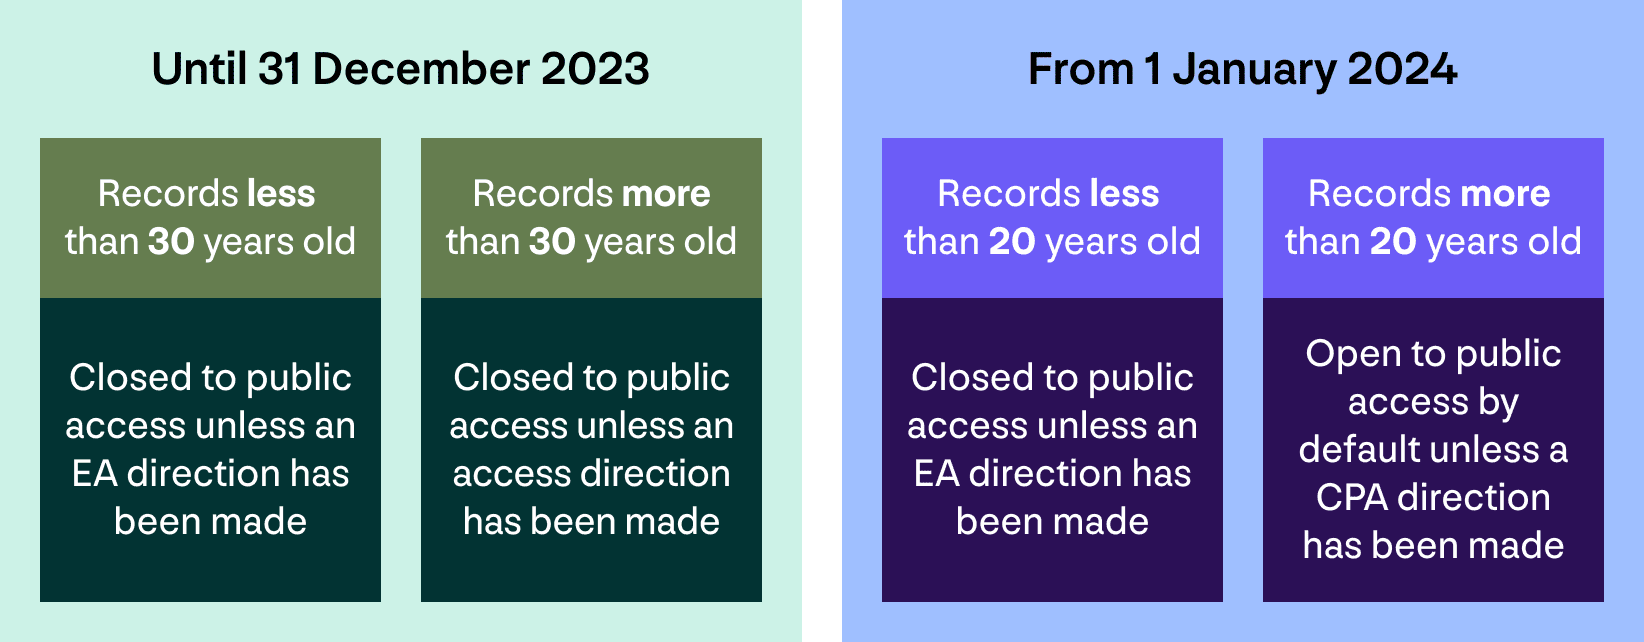 Infographic of changes to OPA and CPA directions